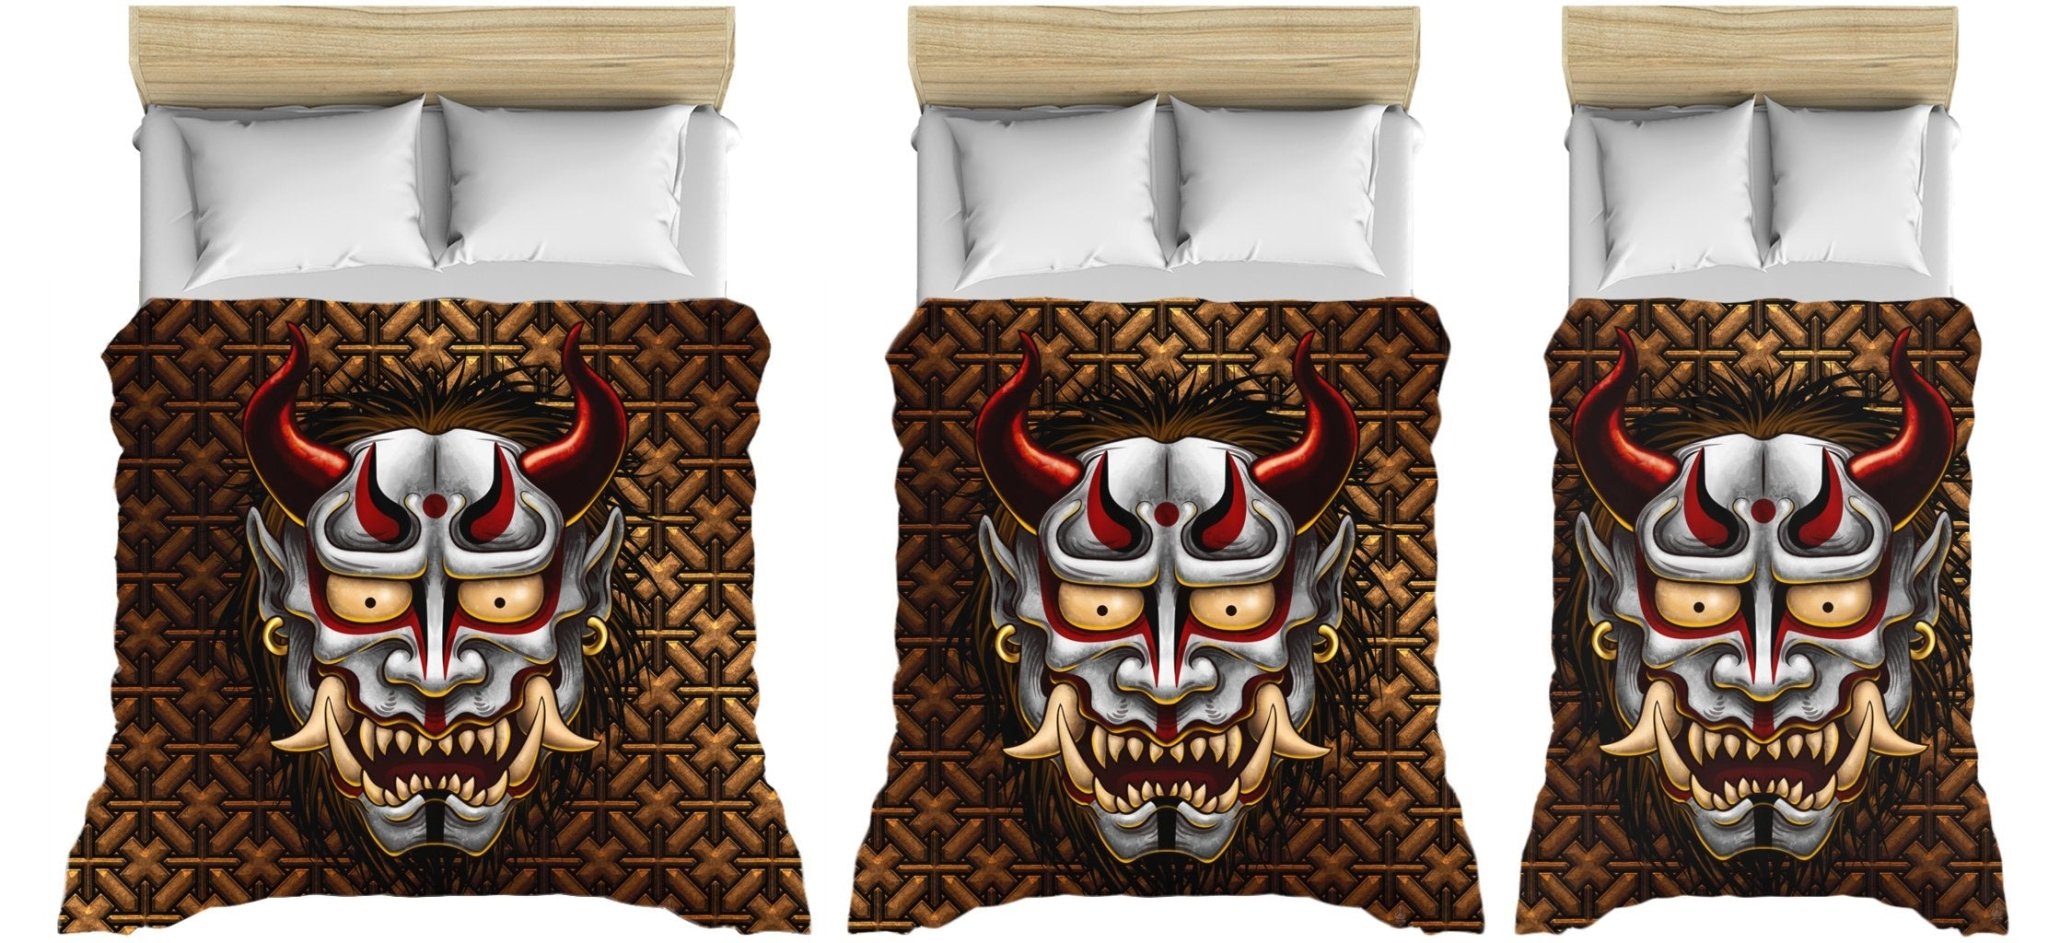 Oni Bedding Set, Comforter and Duvet, Anime Bed Cover and Bedroom Decor, King, Queen and Twin Size - White Japanese Demon - Abysm Internal